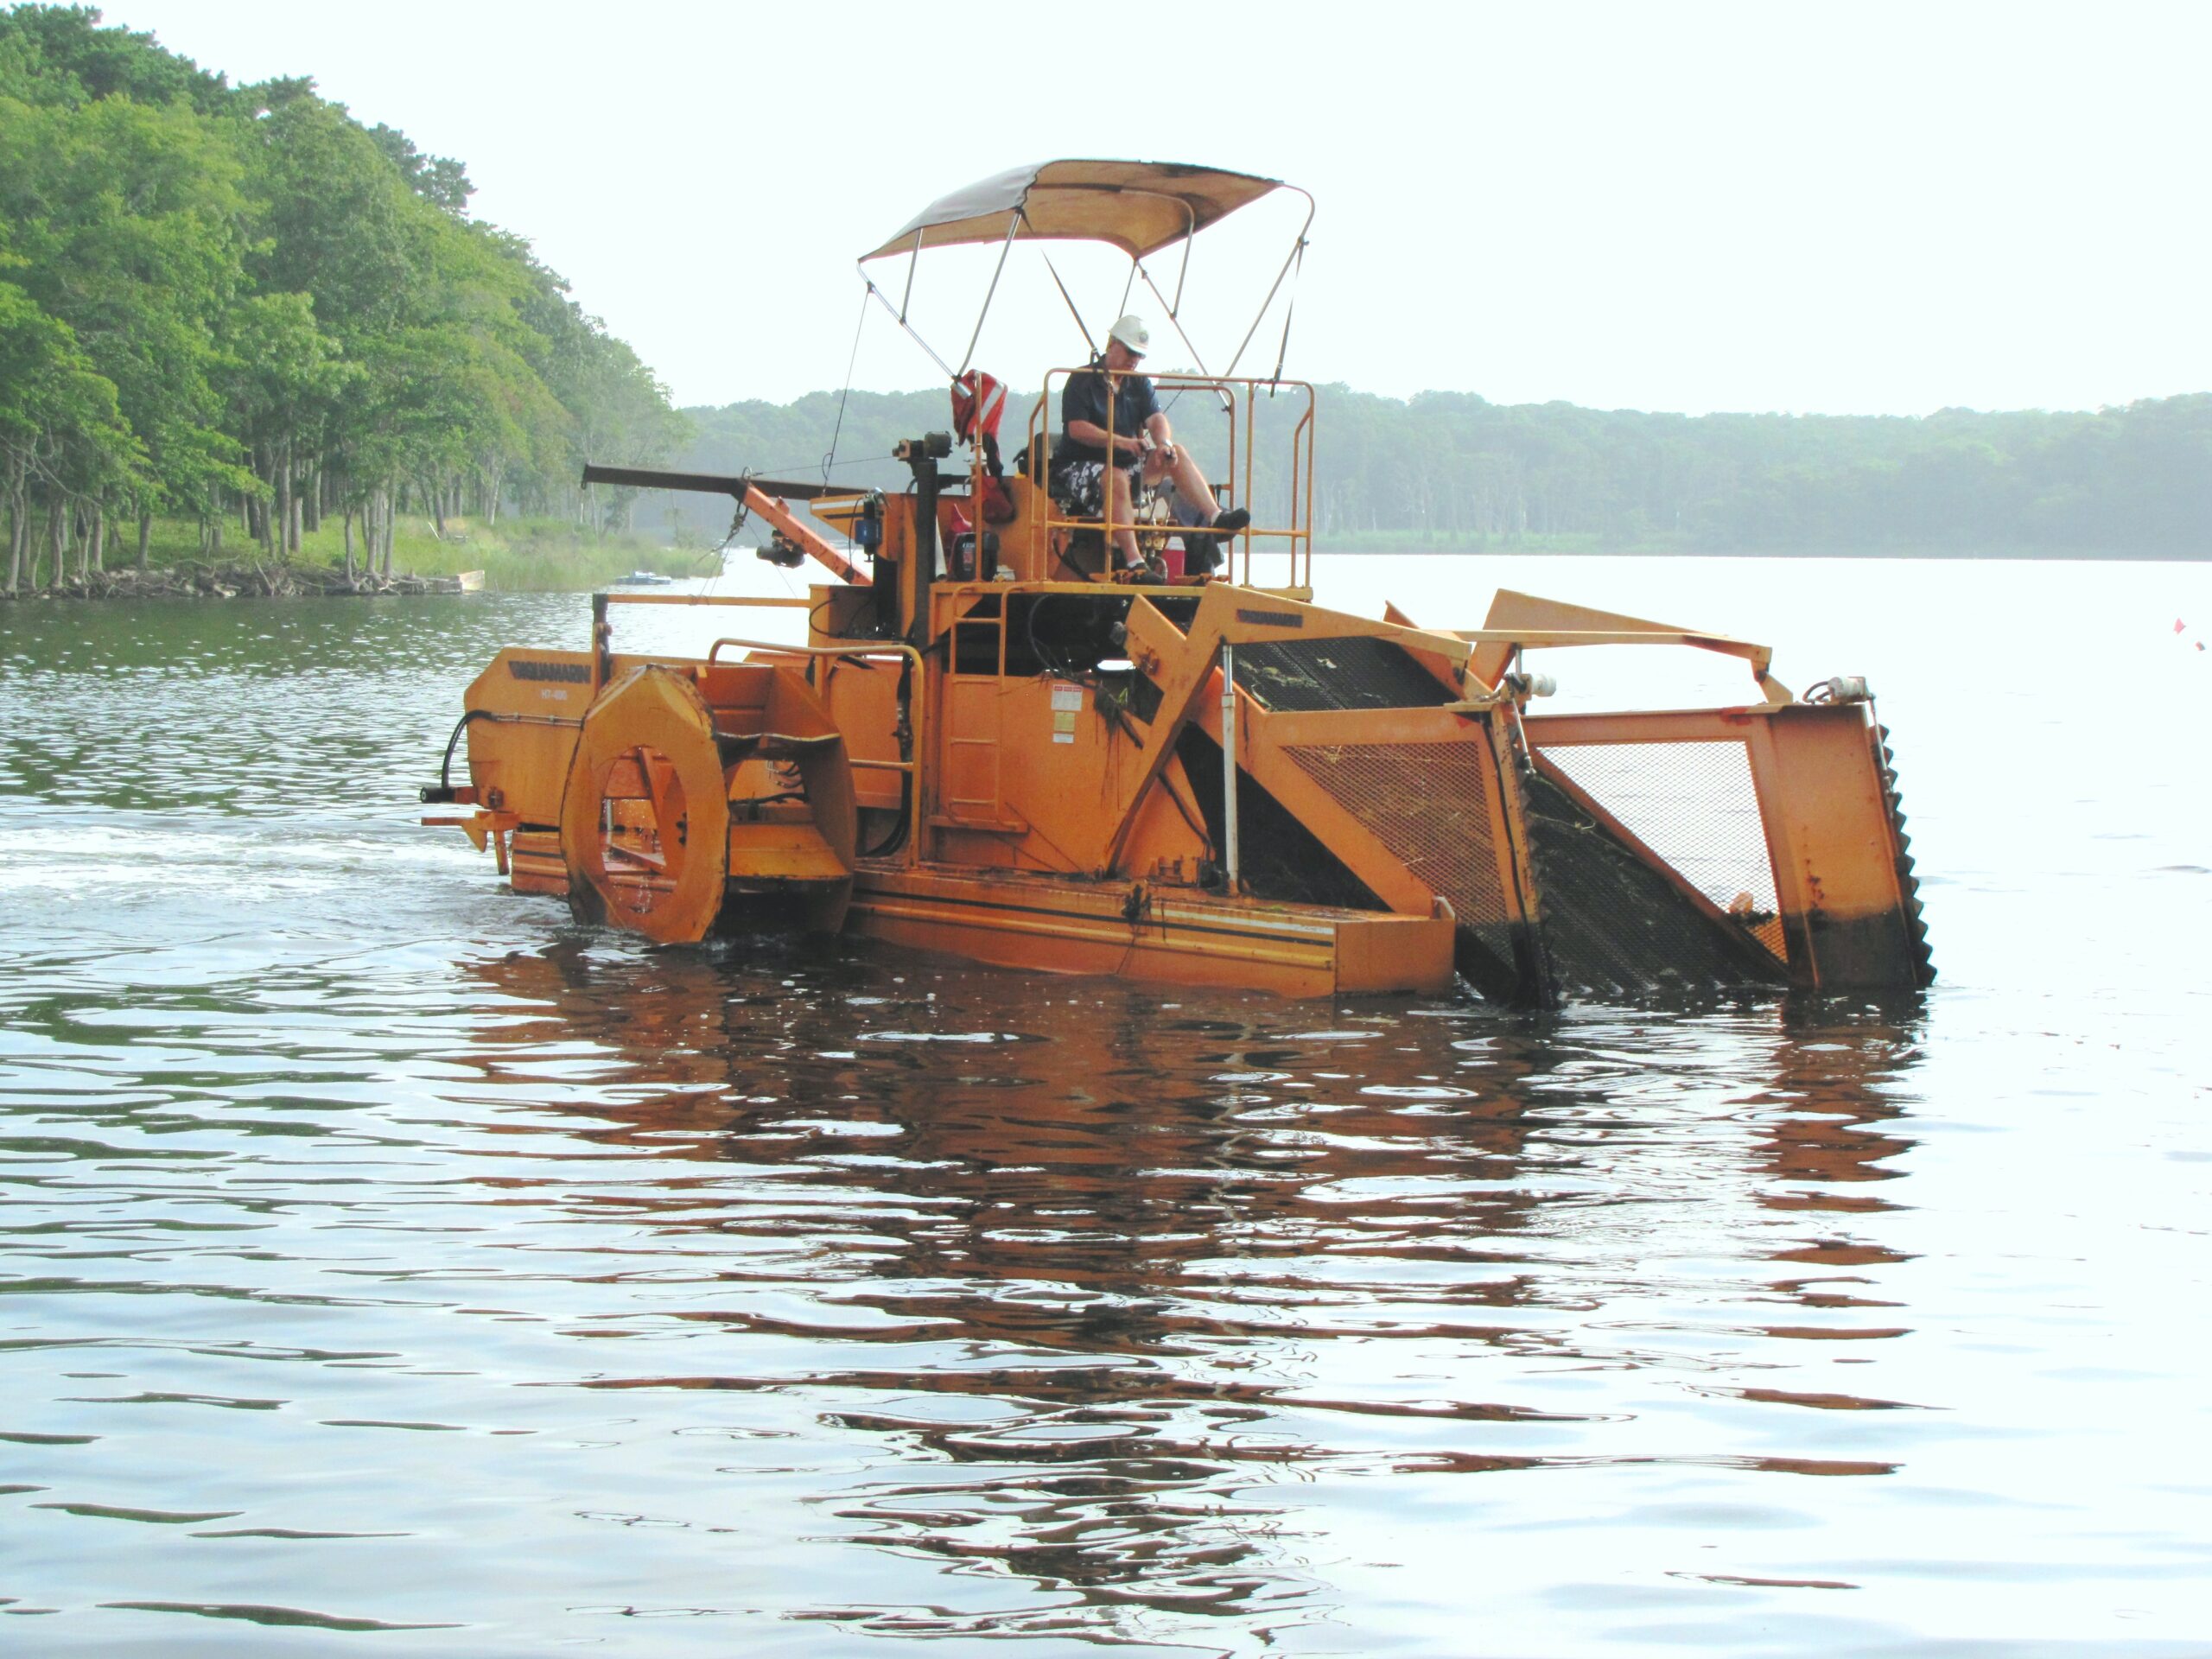 The Friends of Georgica Pond will deploy the aquatic harvester in the pond again this summer. Last year the floating tractor removed 72,000 pounds of nutrient-laden aquatic weeds from the pond, lowering the risk of toxic algae blooms.